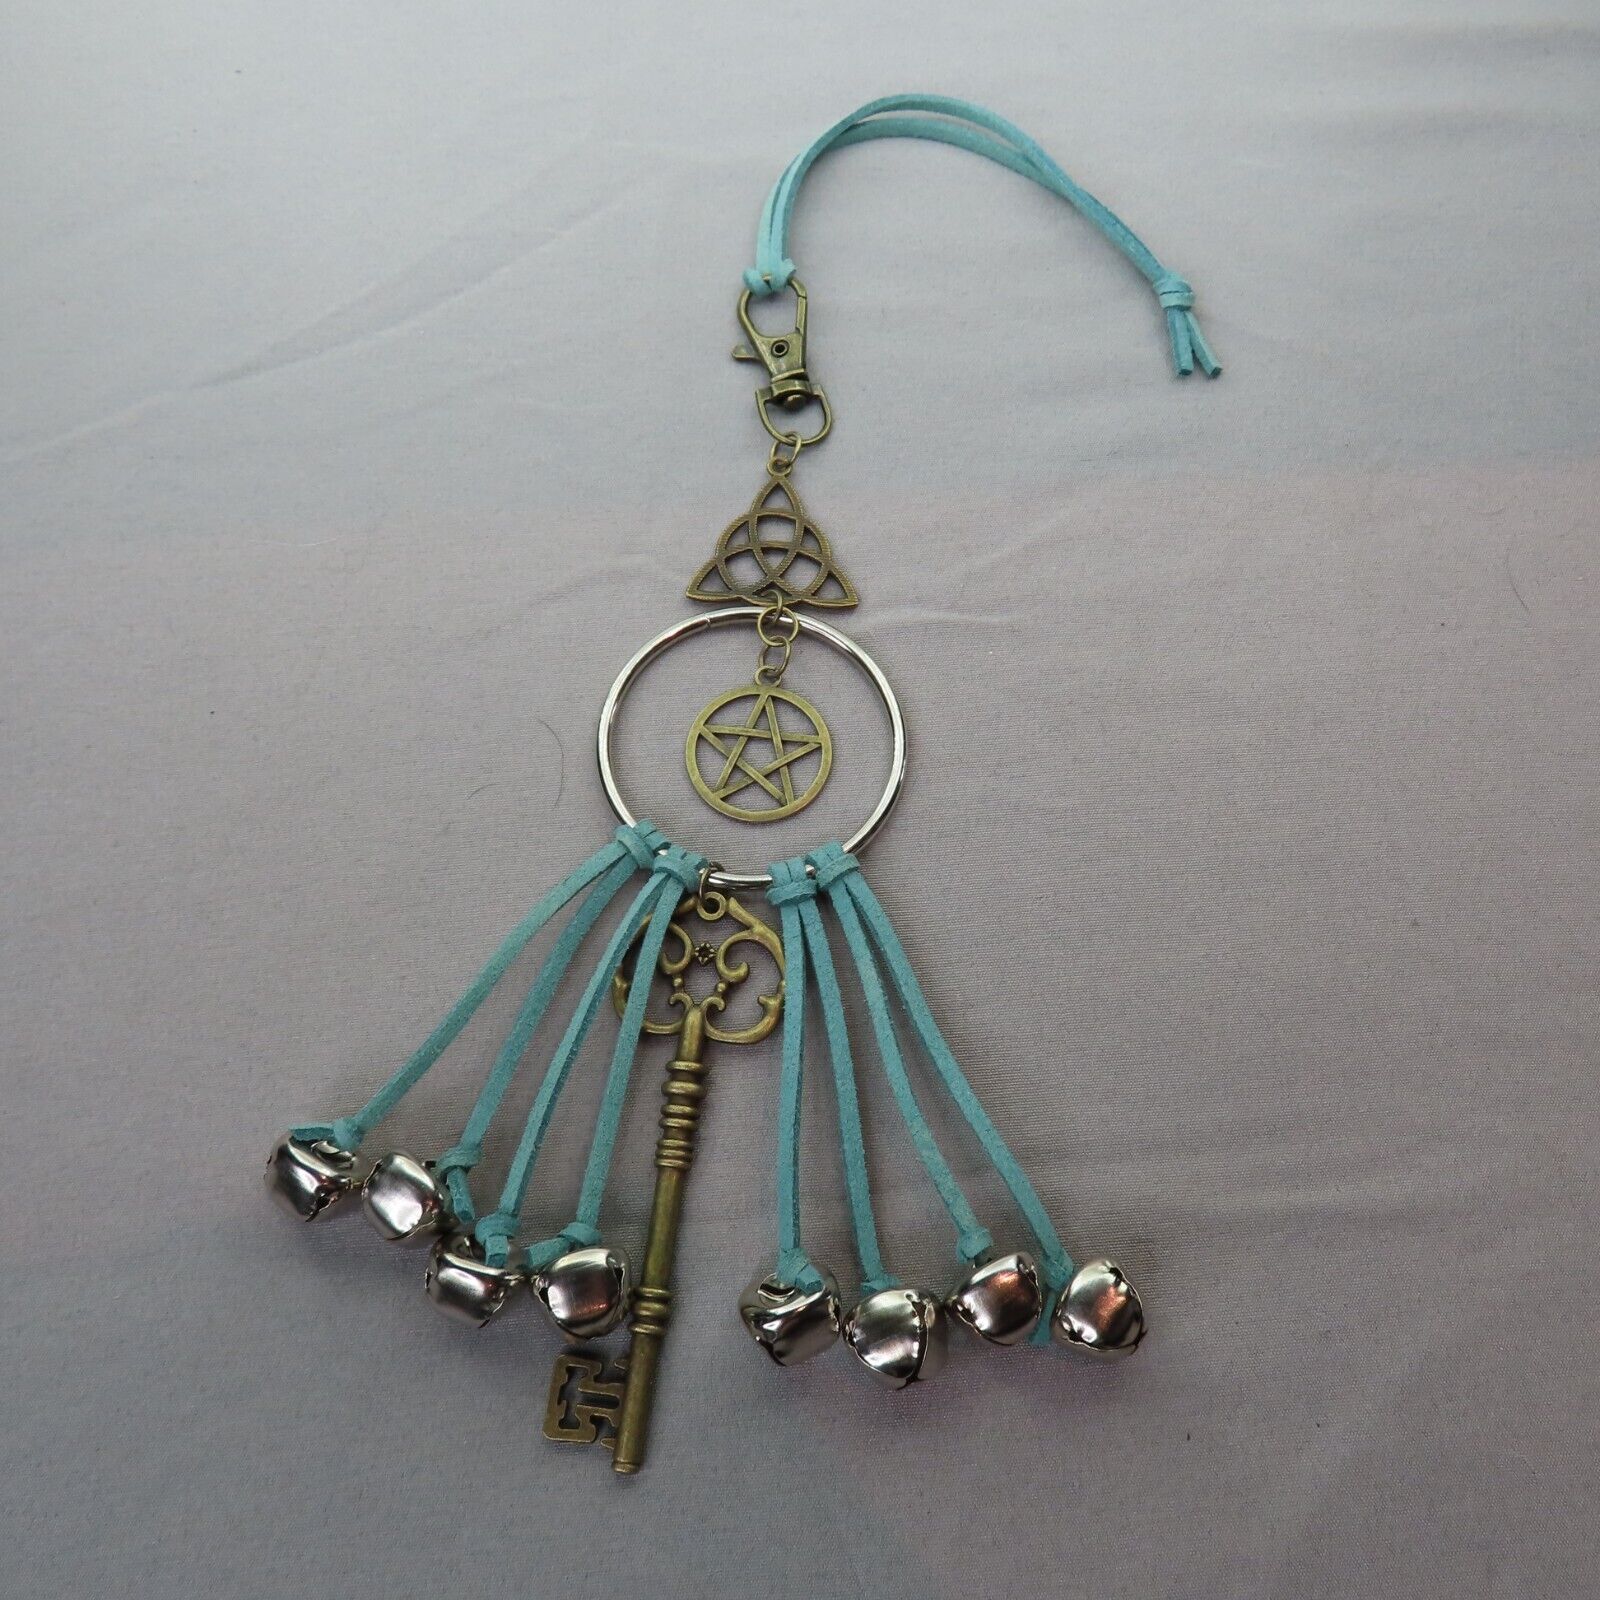 WITCH BELLS For Door Bronze Teal Celtic Knot Pentacle Wiccan Decor Protection